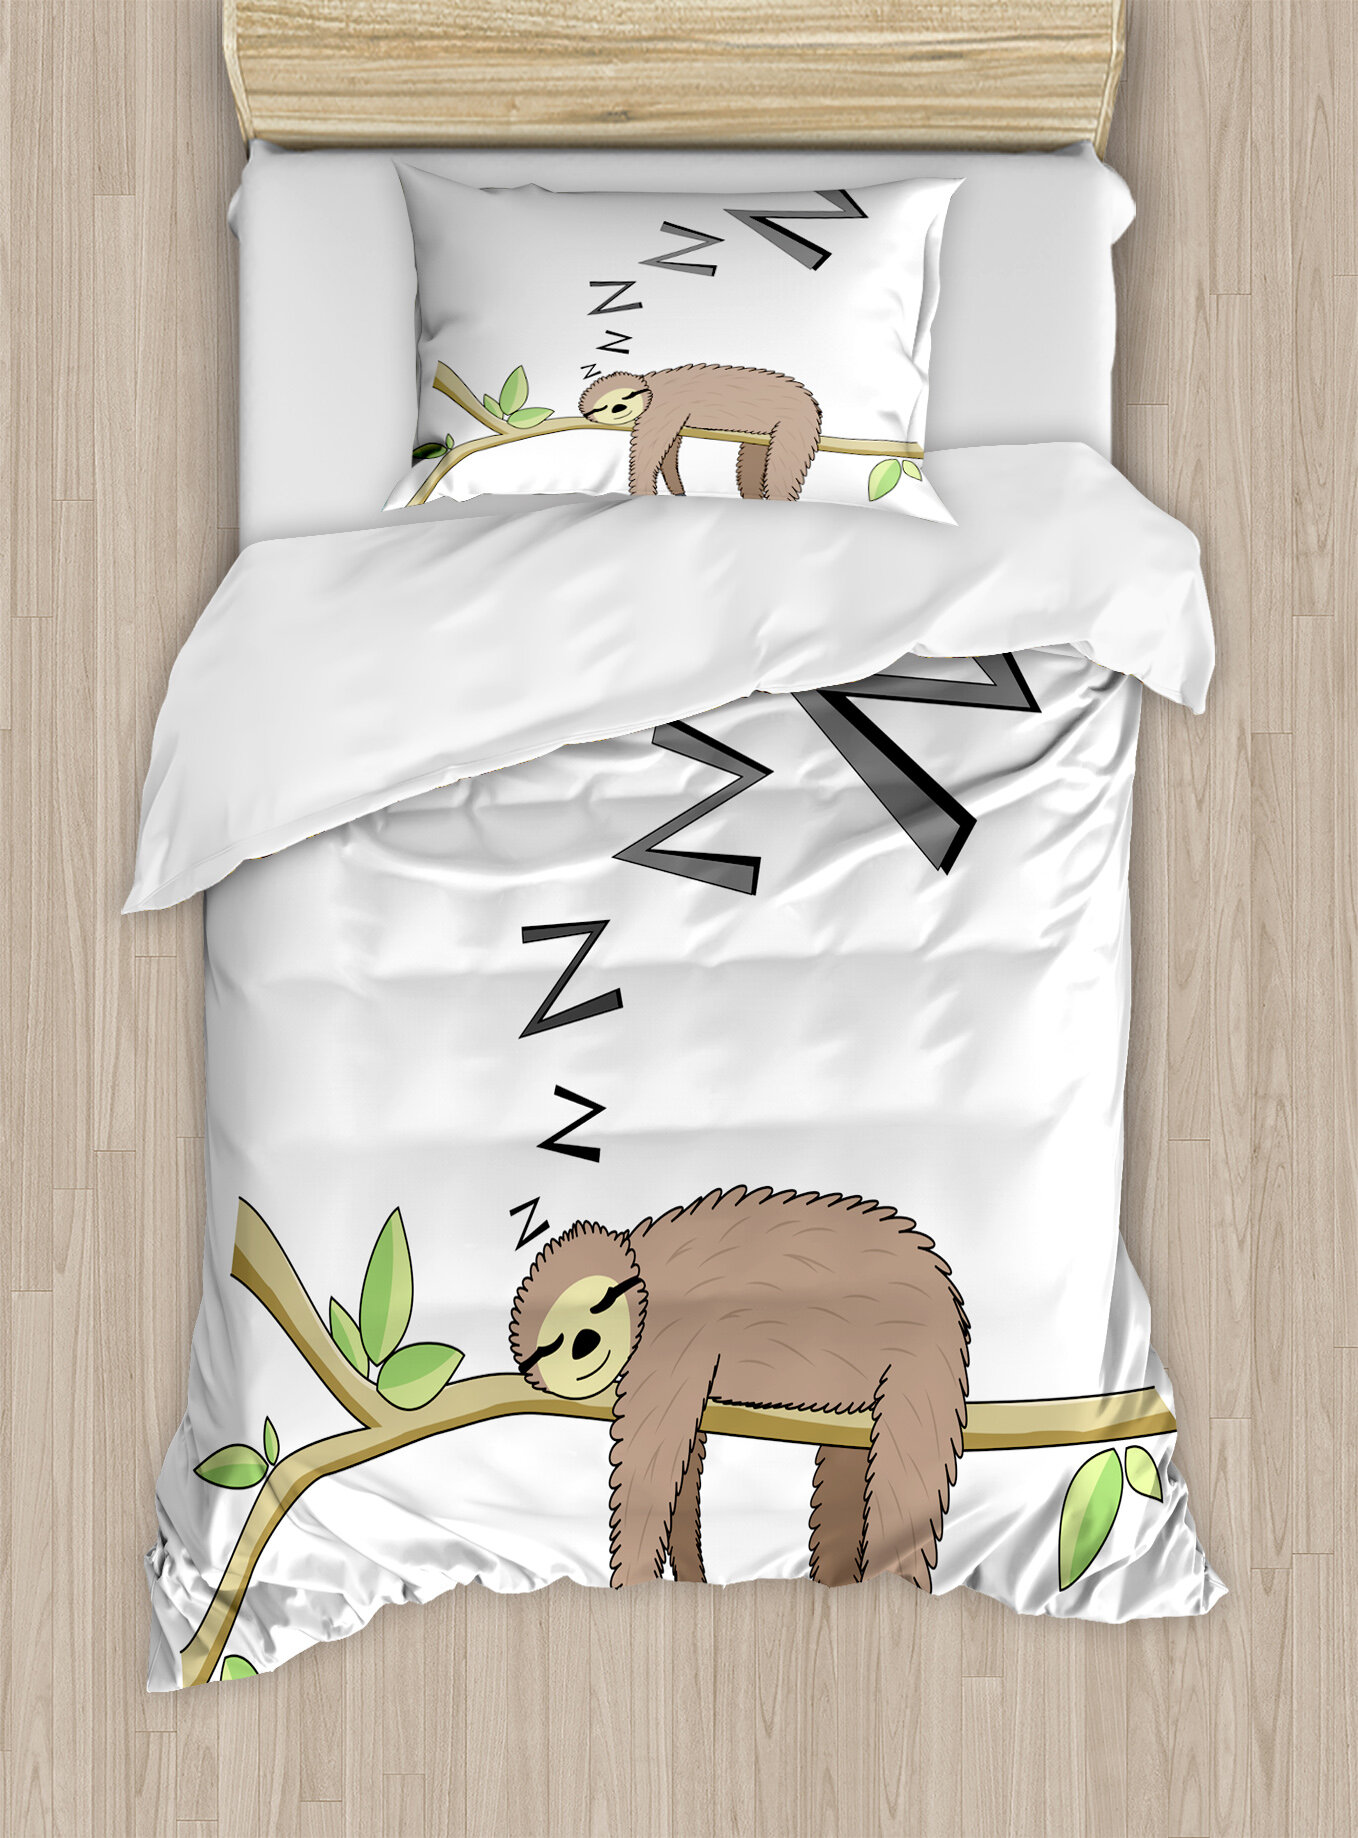 Simply Sloth Animal Print Novelty Duvet Cover Quilt Cover Set